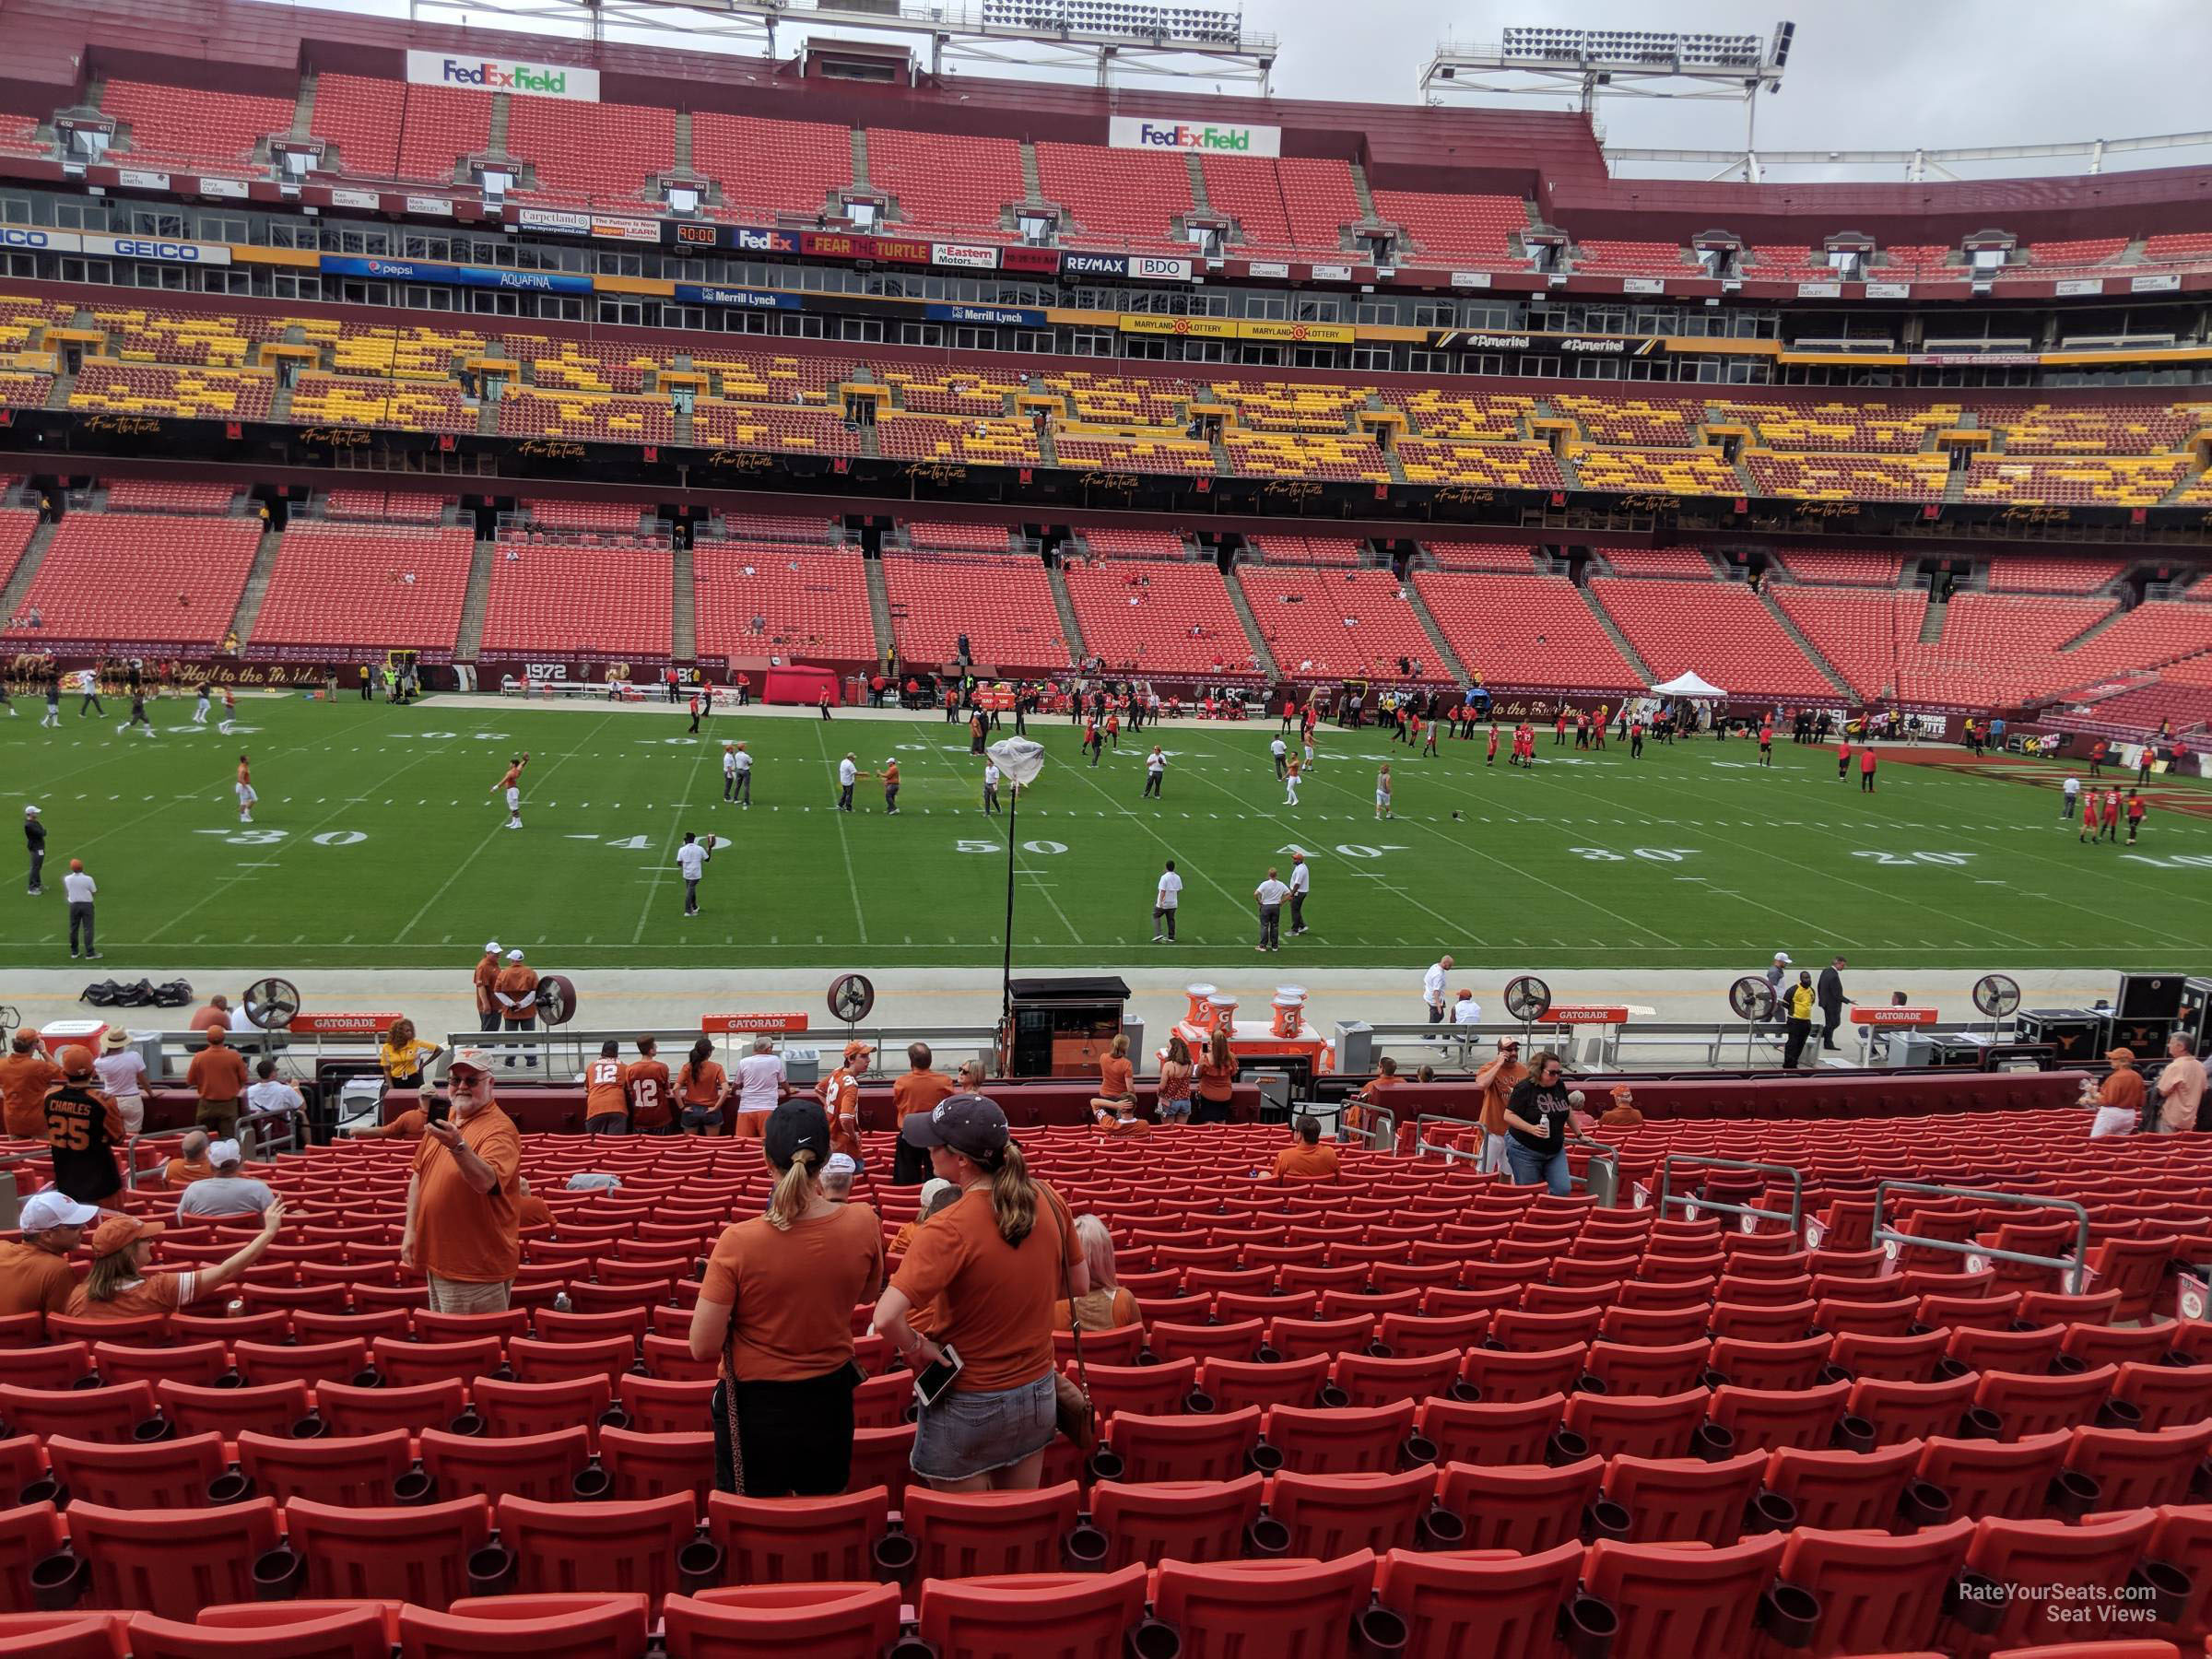 section 122, row 25 seat view  - fedexfield